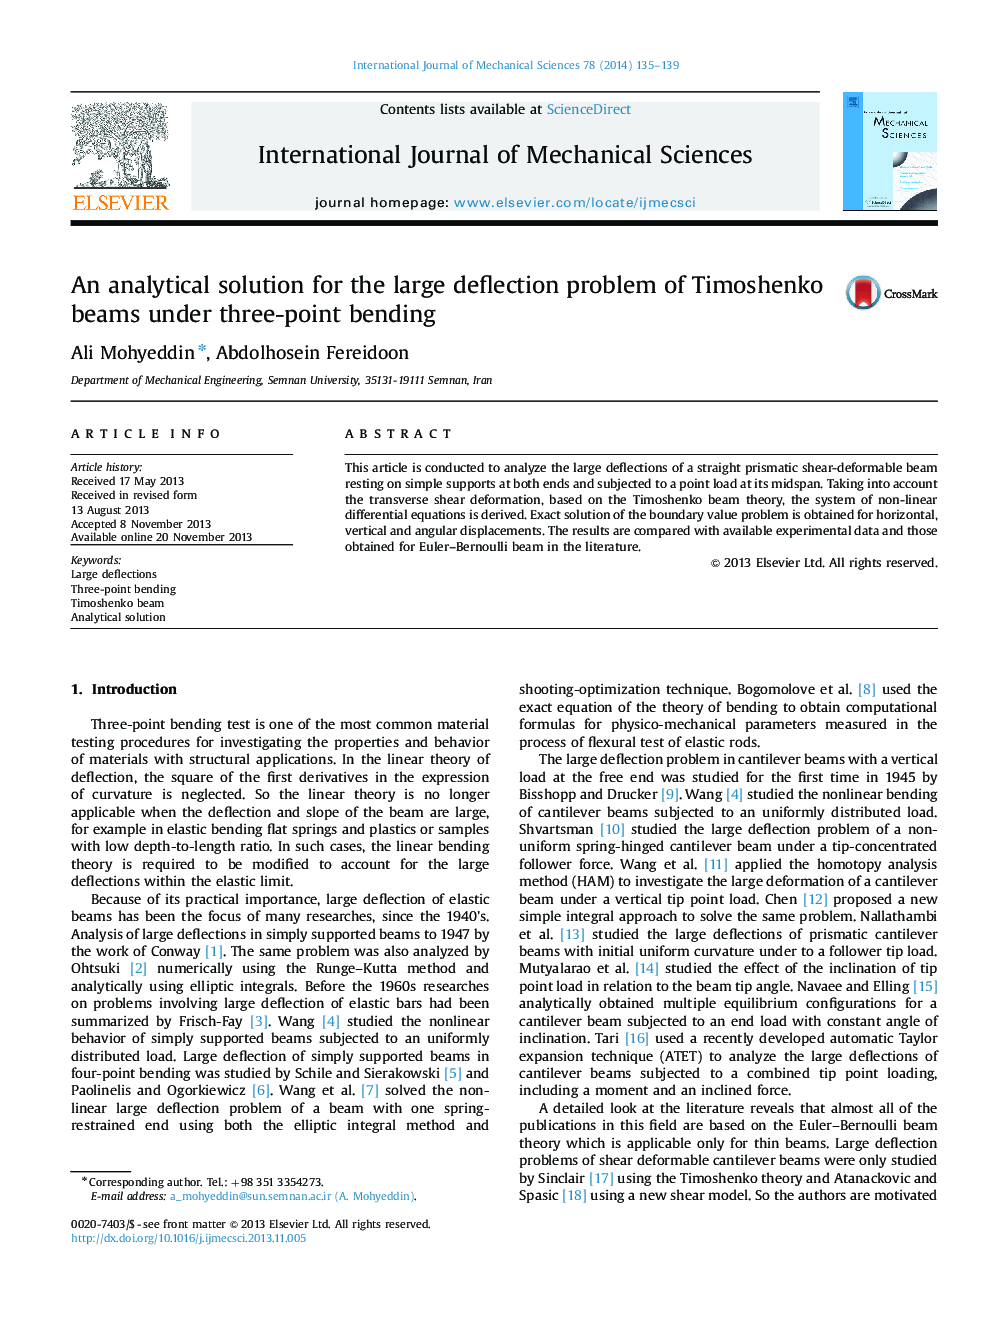 An analytical solution for the large deflection problem of Timoshenko beams under three-point bending